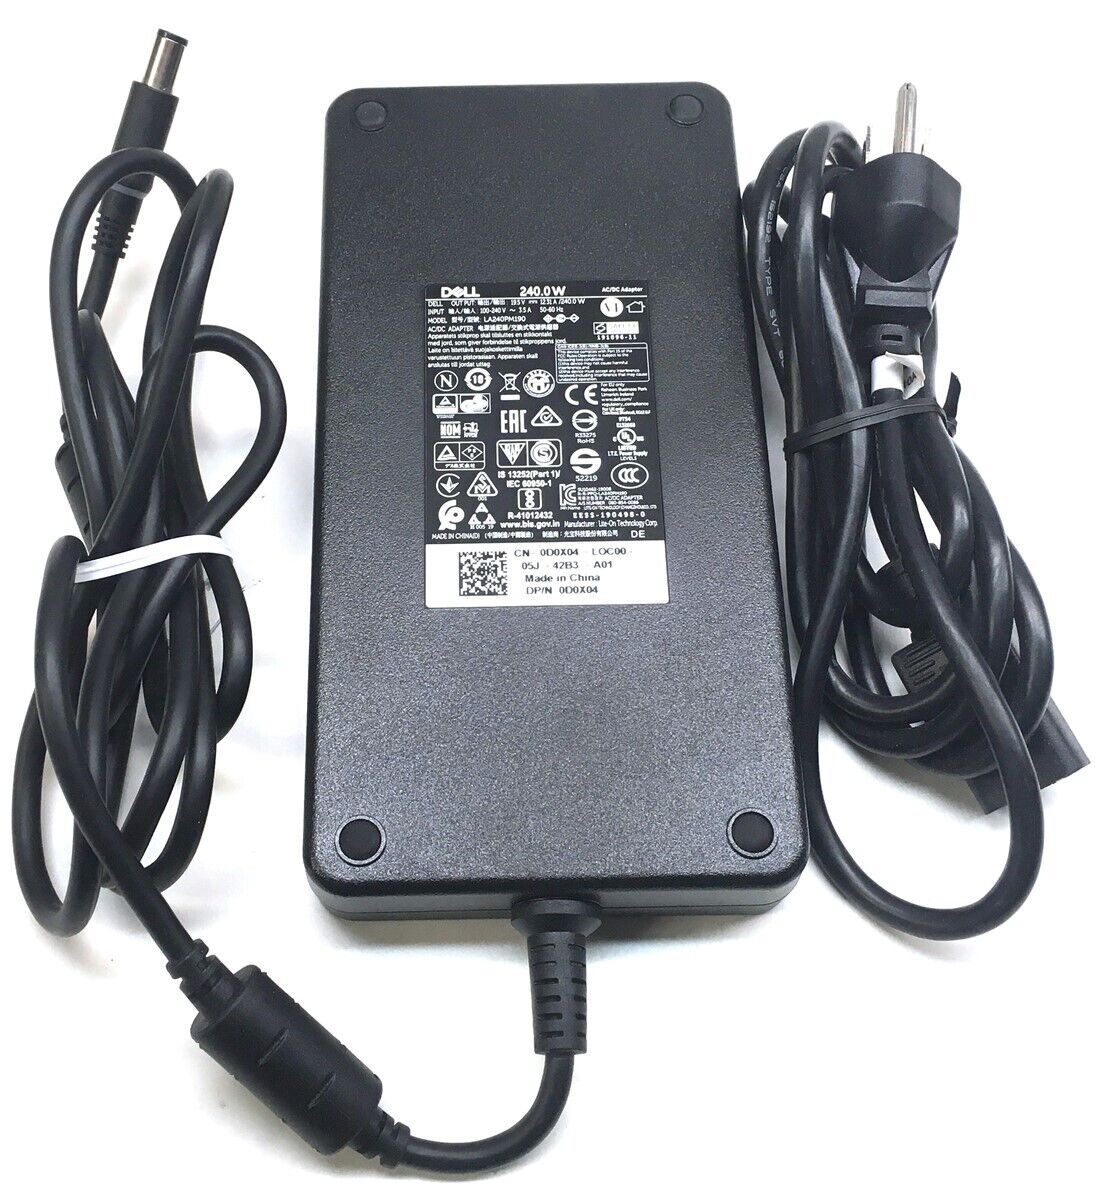 Genuine Dell Laptop Charger AC Adapter Power Supply LA240PM190 0D0X04 19.5V 240W